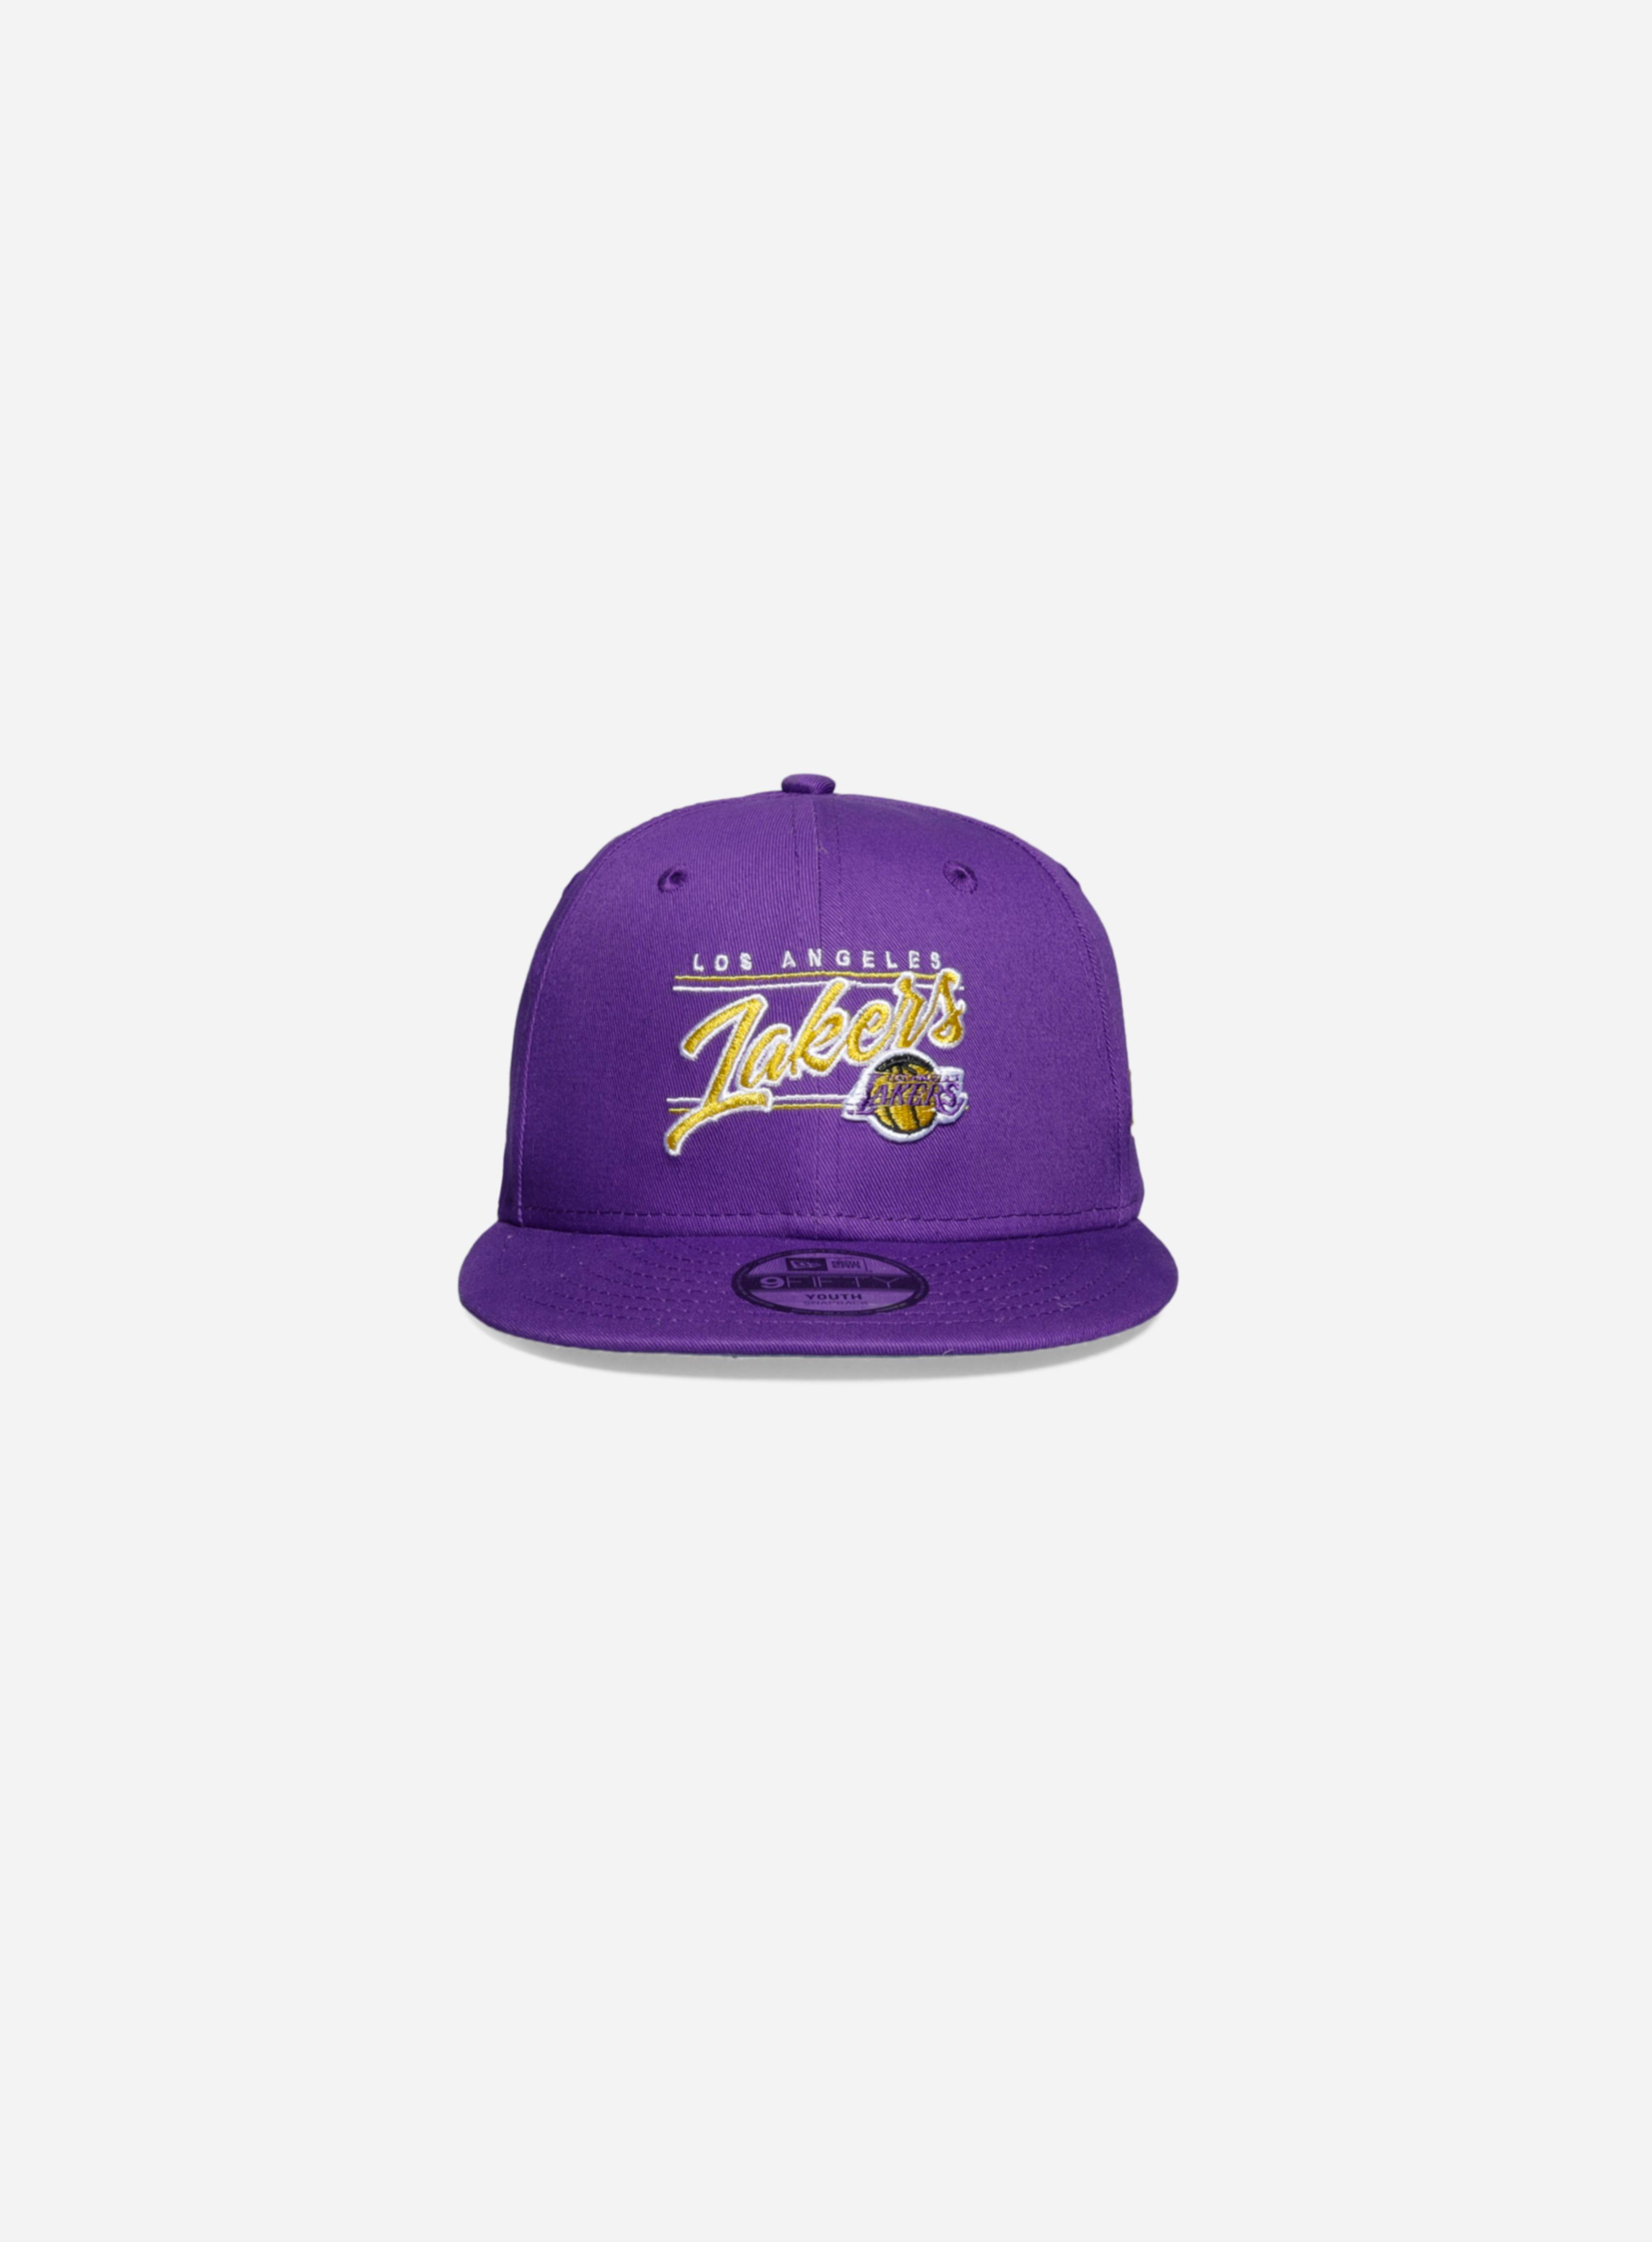 Los Angeles Lakers 9Fifty Snapback